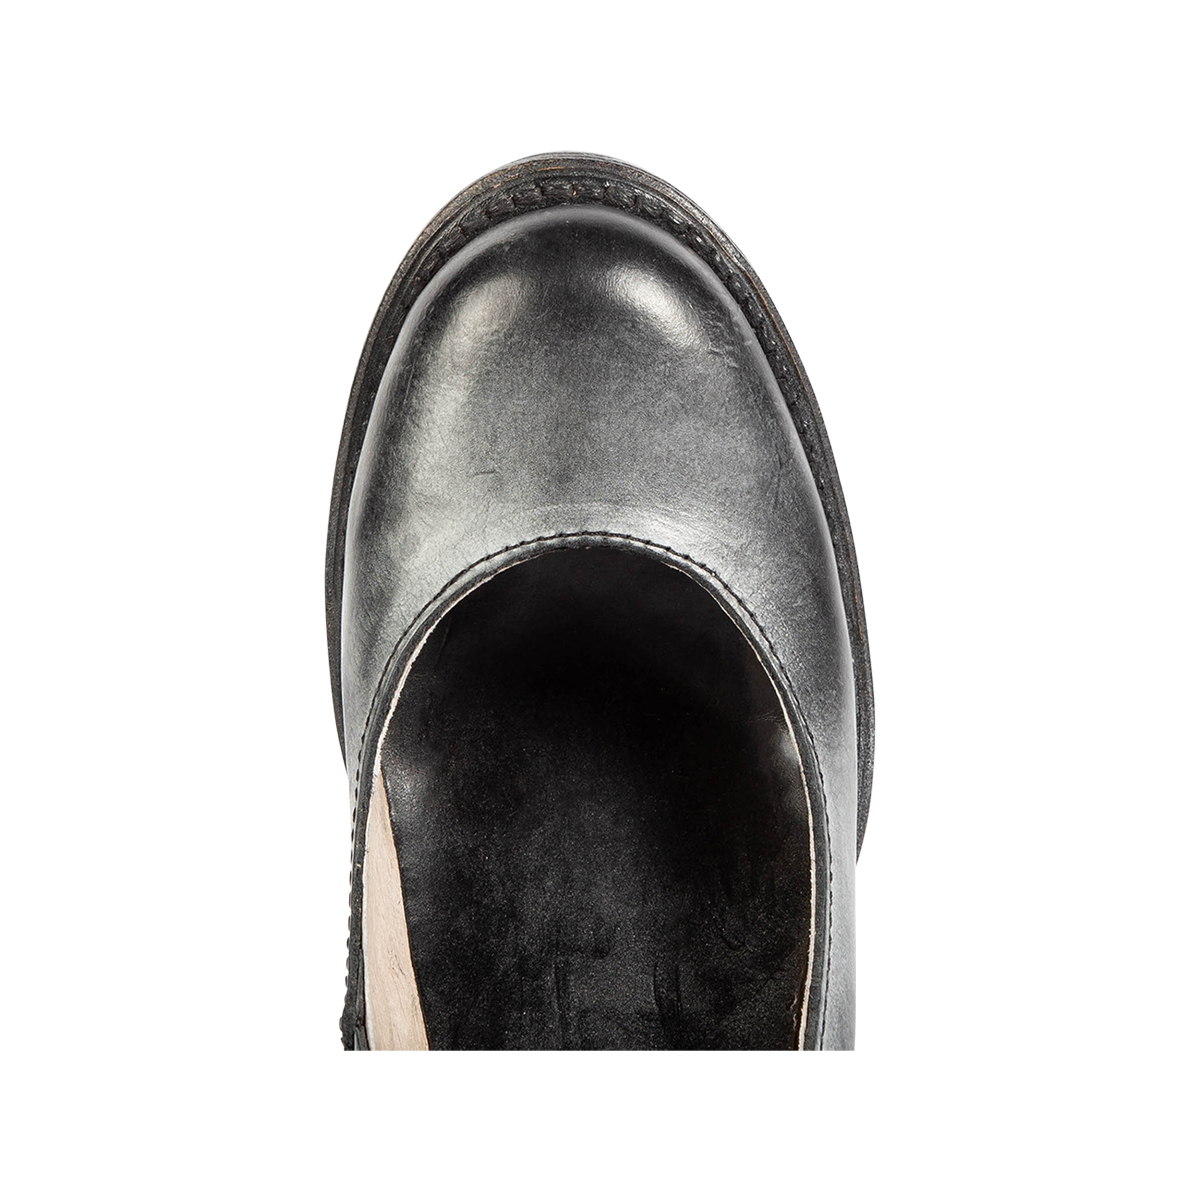 Top view showing round toe and open construction on FREEBIRD women’s Randi black leather shoe